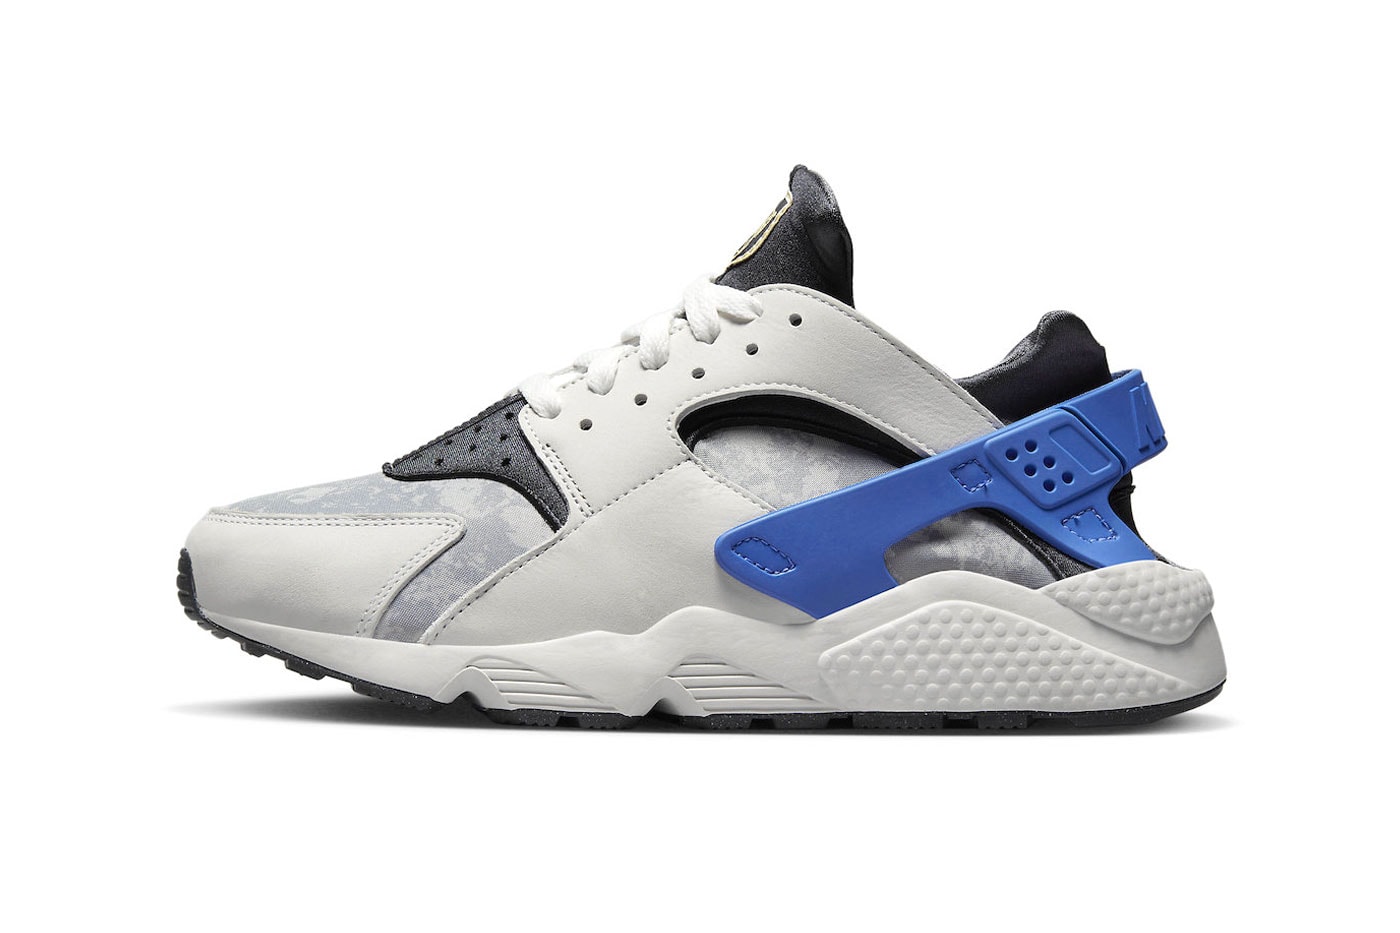 Nike Air Huarache Social FC Soccer light smoke grey summit white anthracite neoprene mesh leather release info date price 135 usd DR0286 100